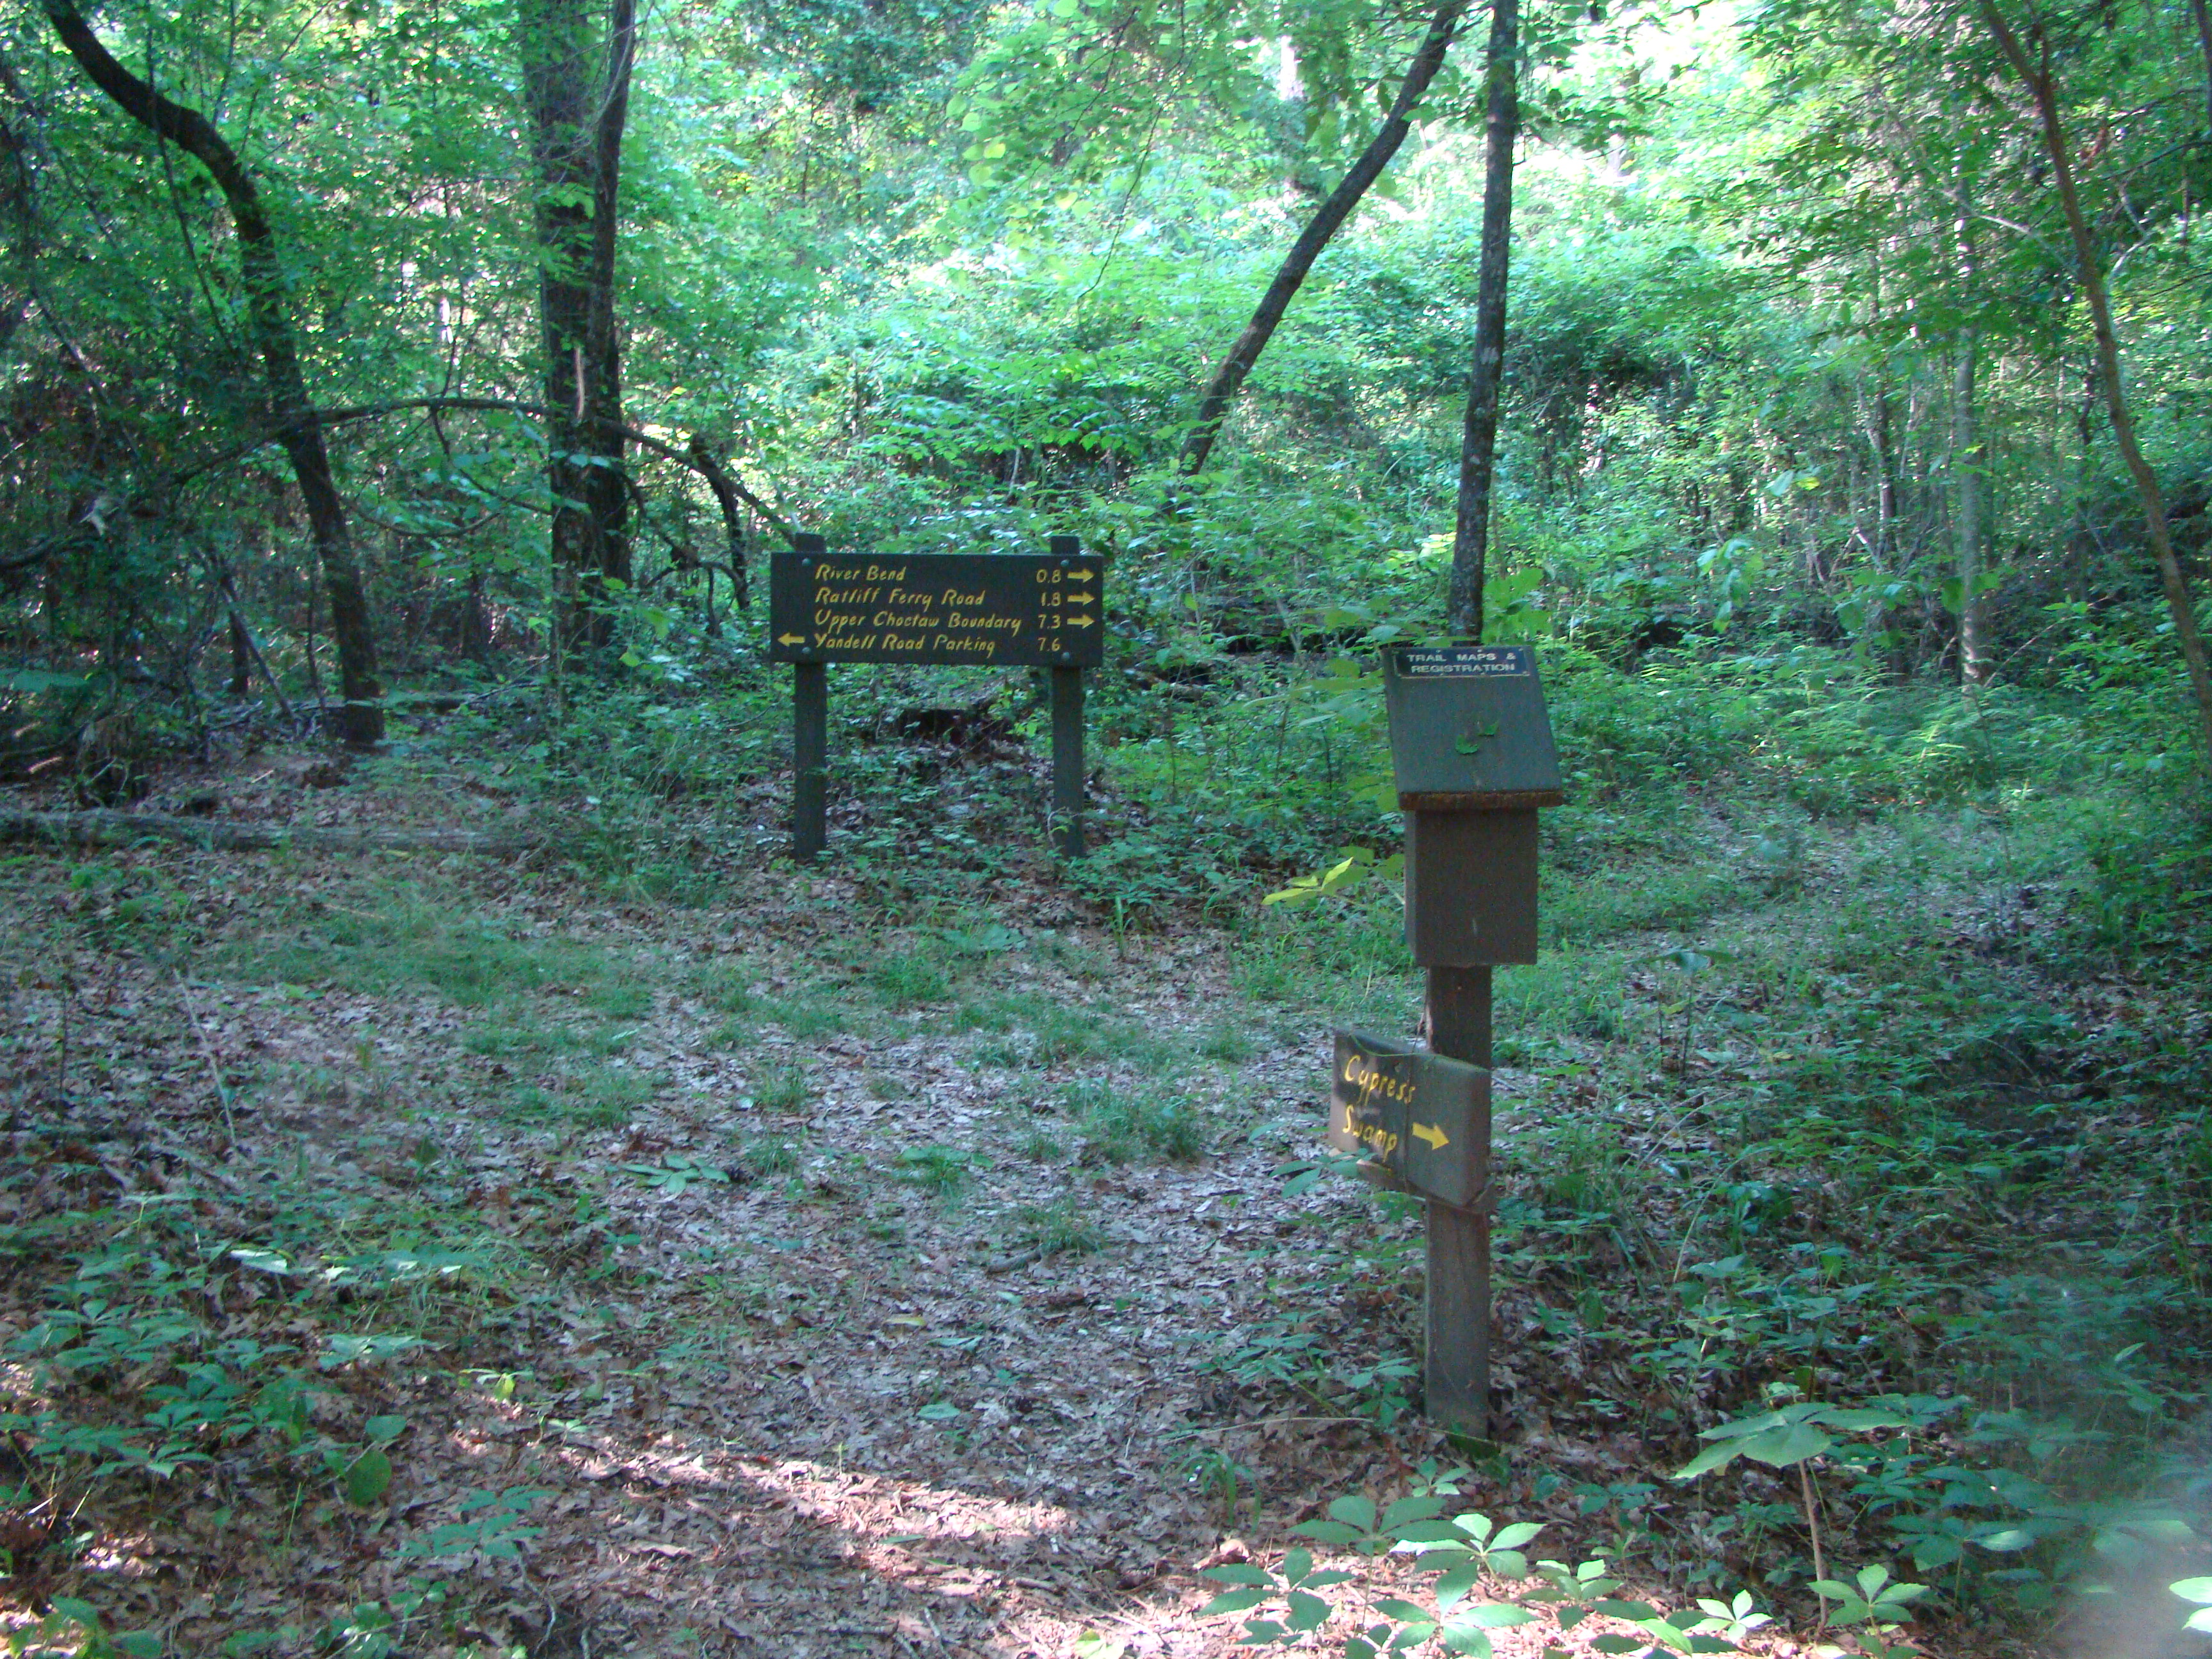 A fork in the trail with directional signs